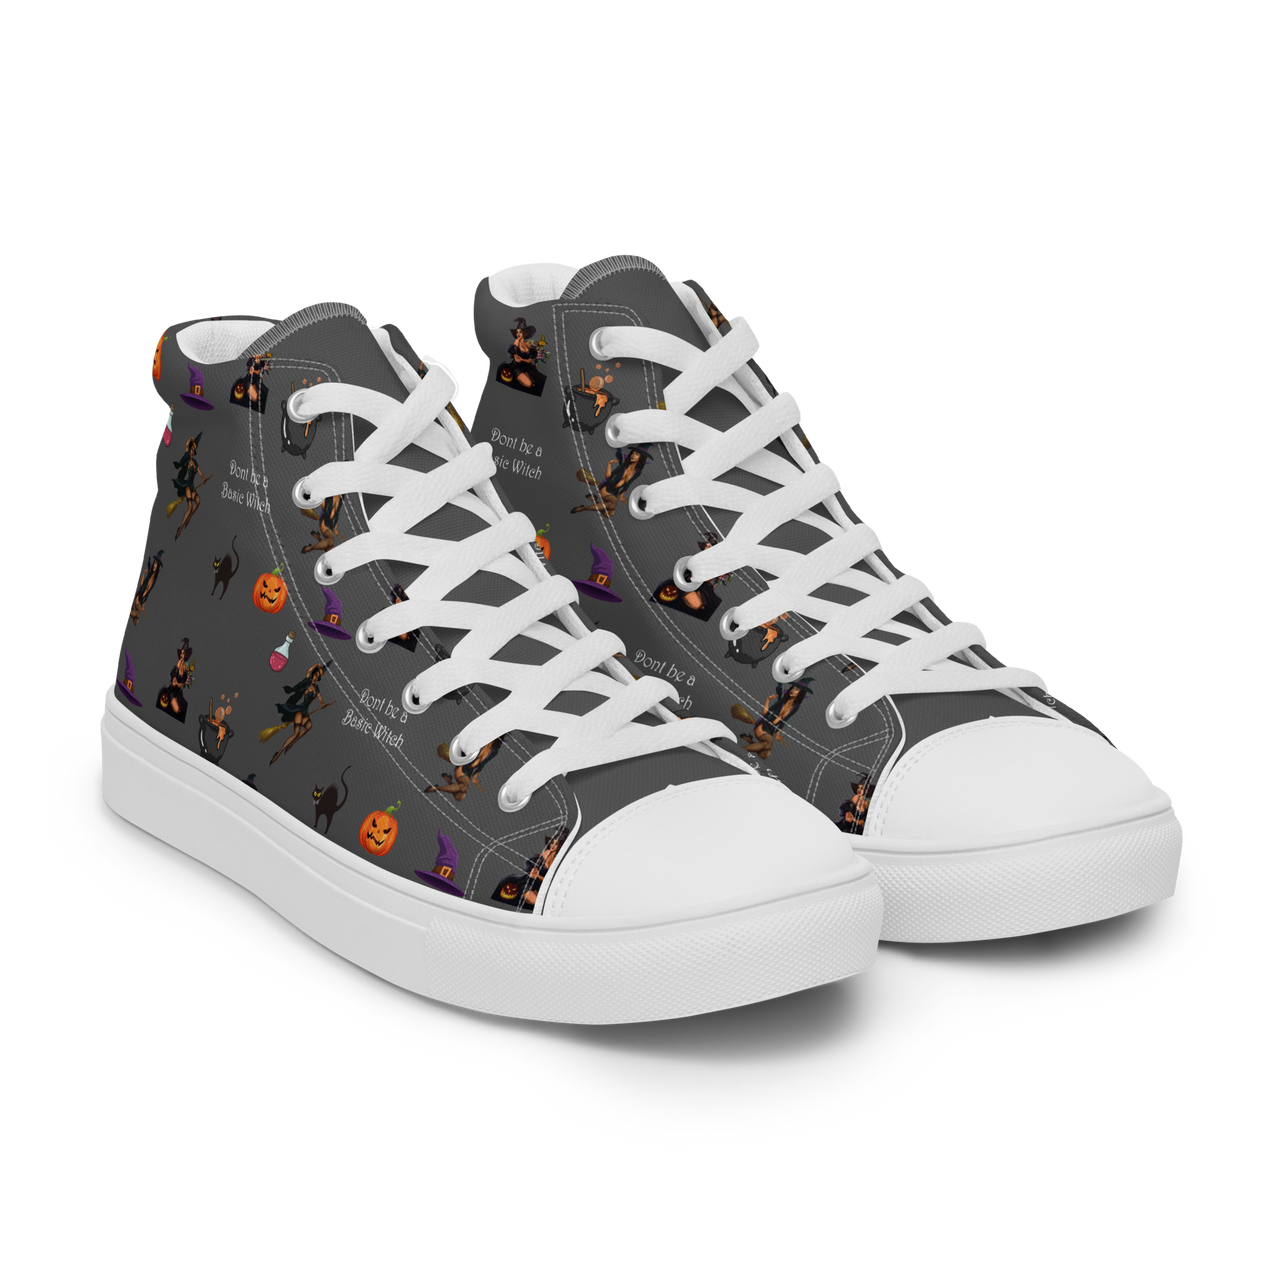 Halloween Women’s high top canvas shoes, Halloween All Over Print Women’s high top canvas shoes ,Women's shoes/Don't be a Basic Witch SHAVA